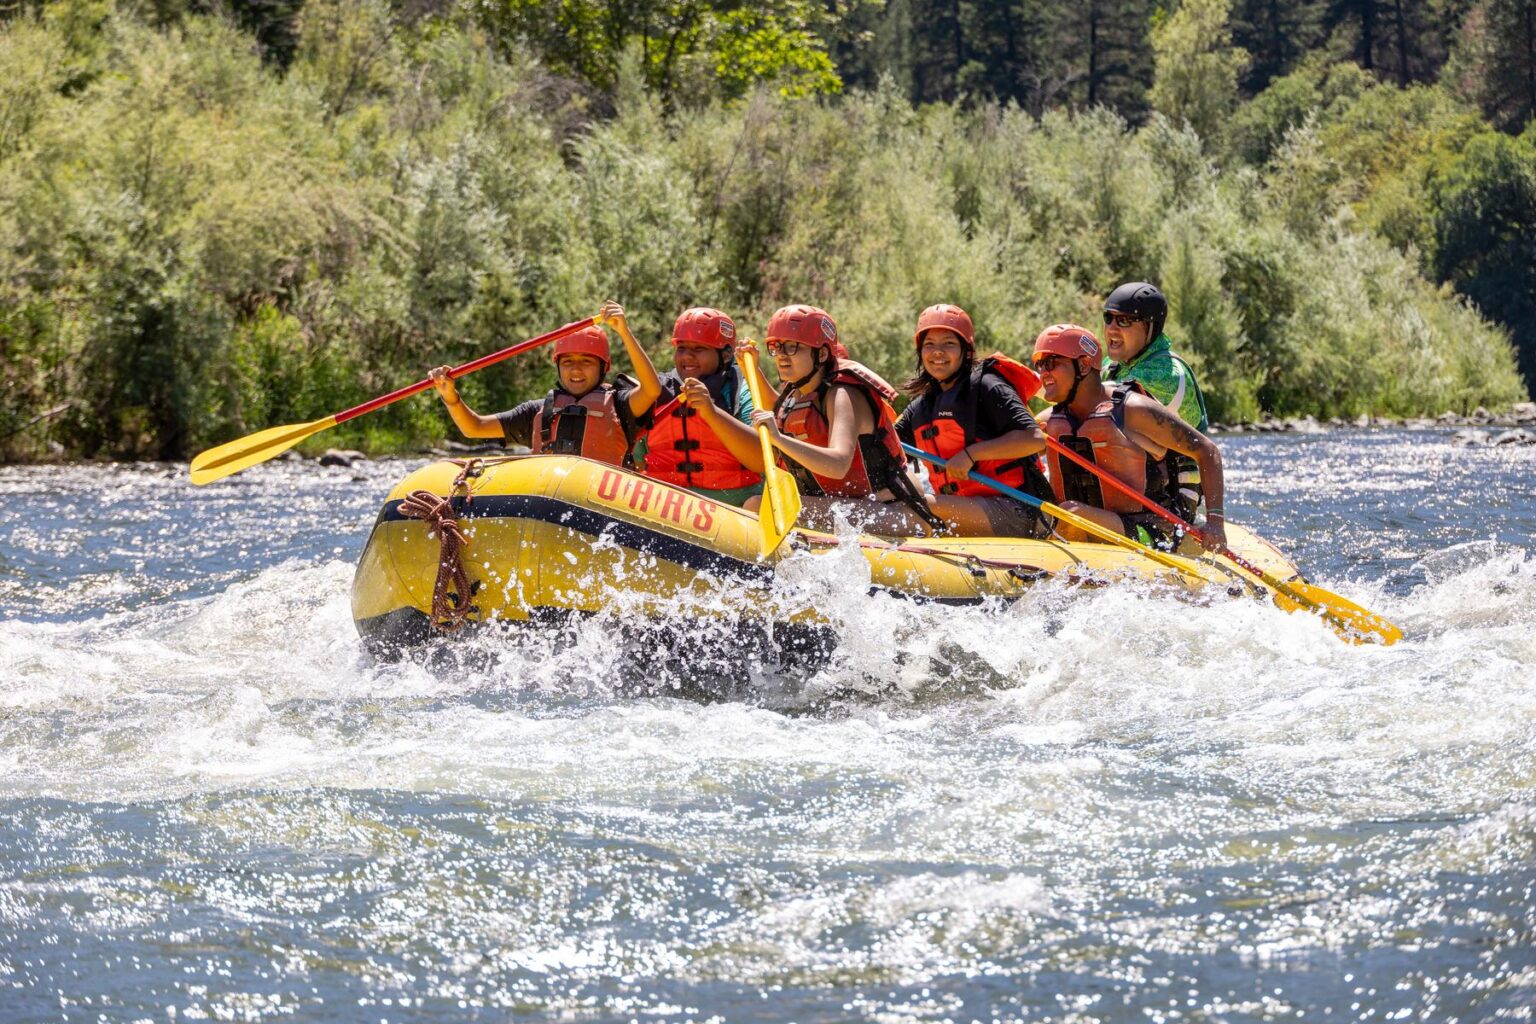 A group of youth splashes through a rapid while rafting on the Rogue River.